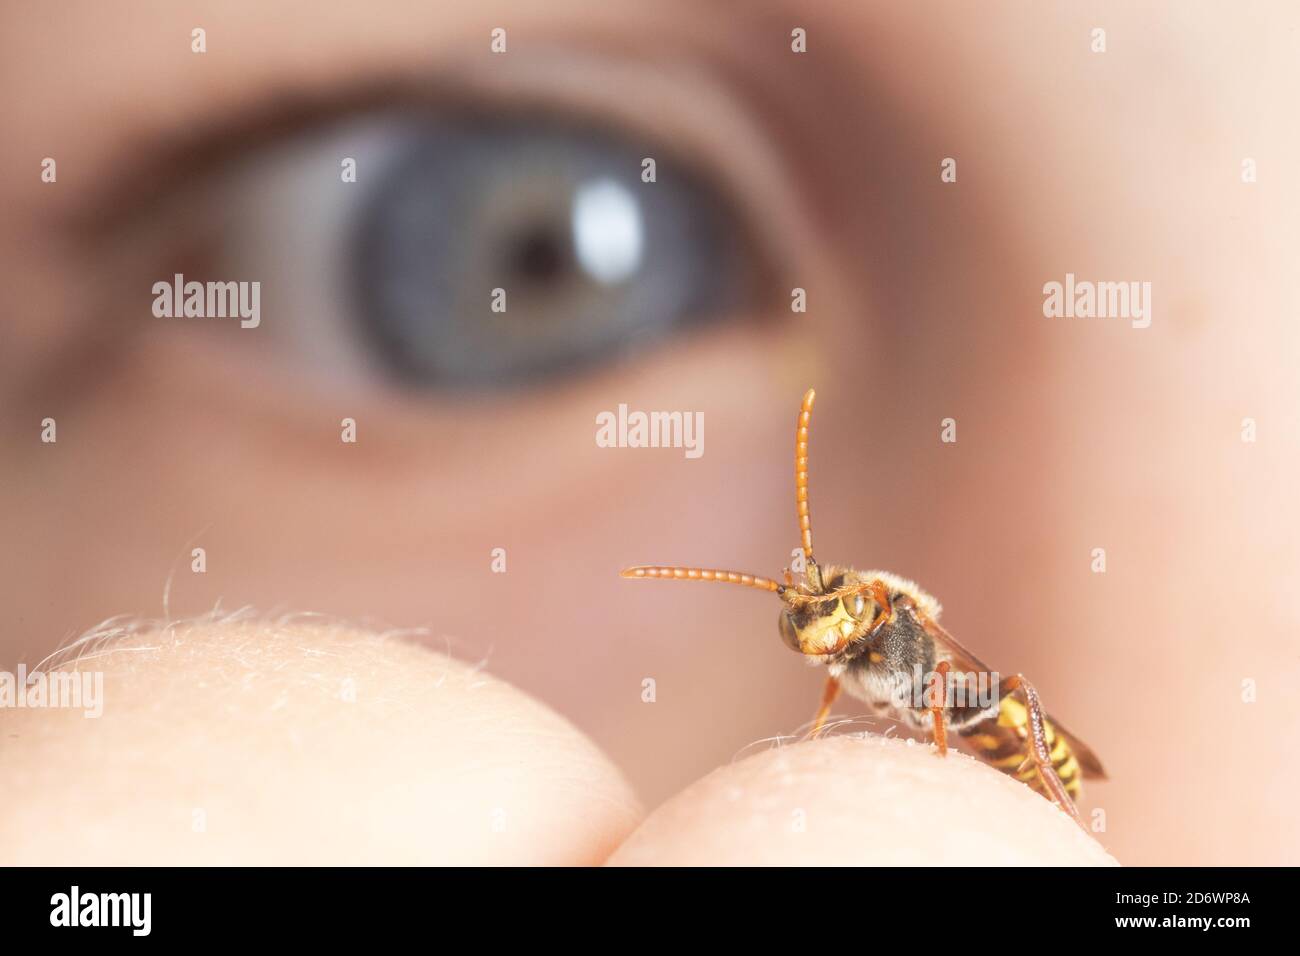 Tiny nomad bee on child's hand, being observed at close quarters. Stock Photo